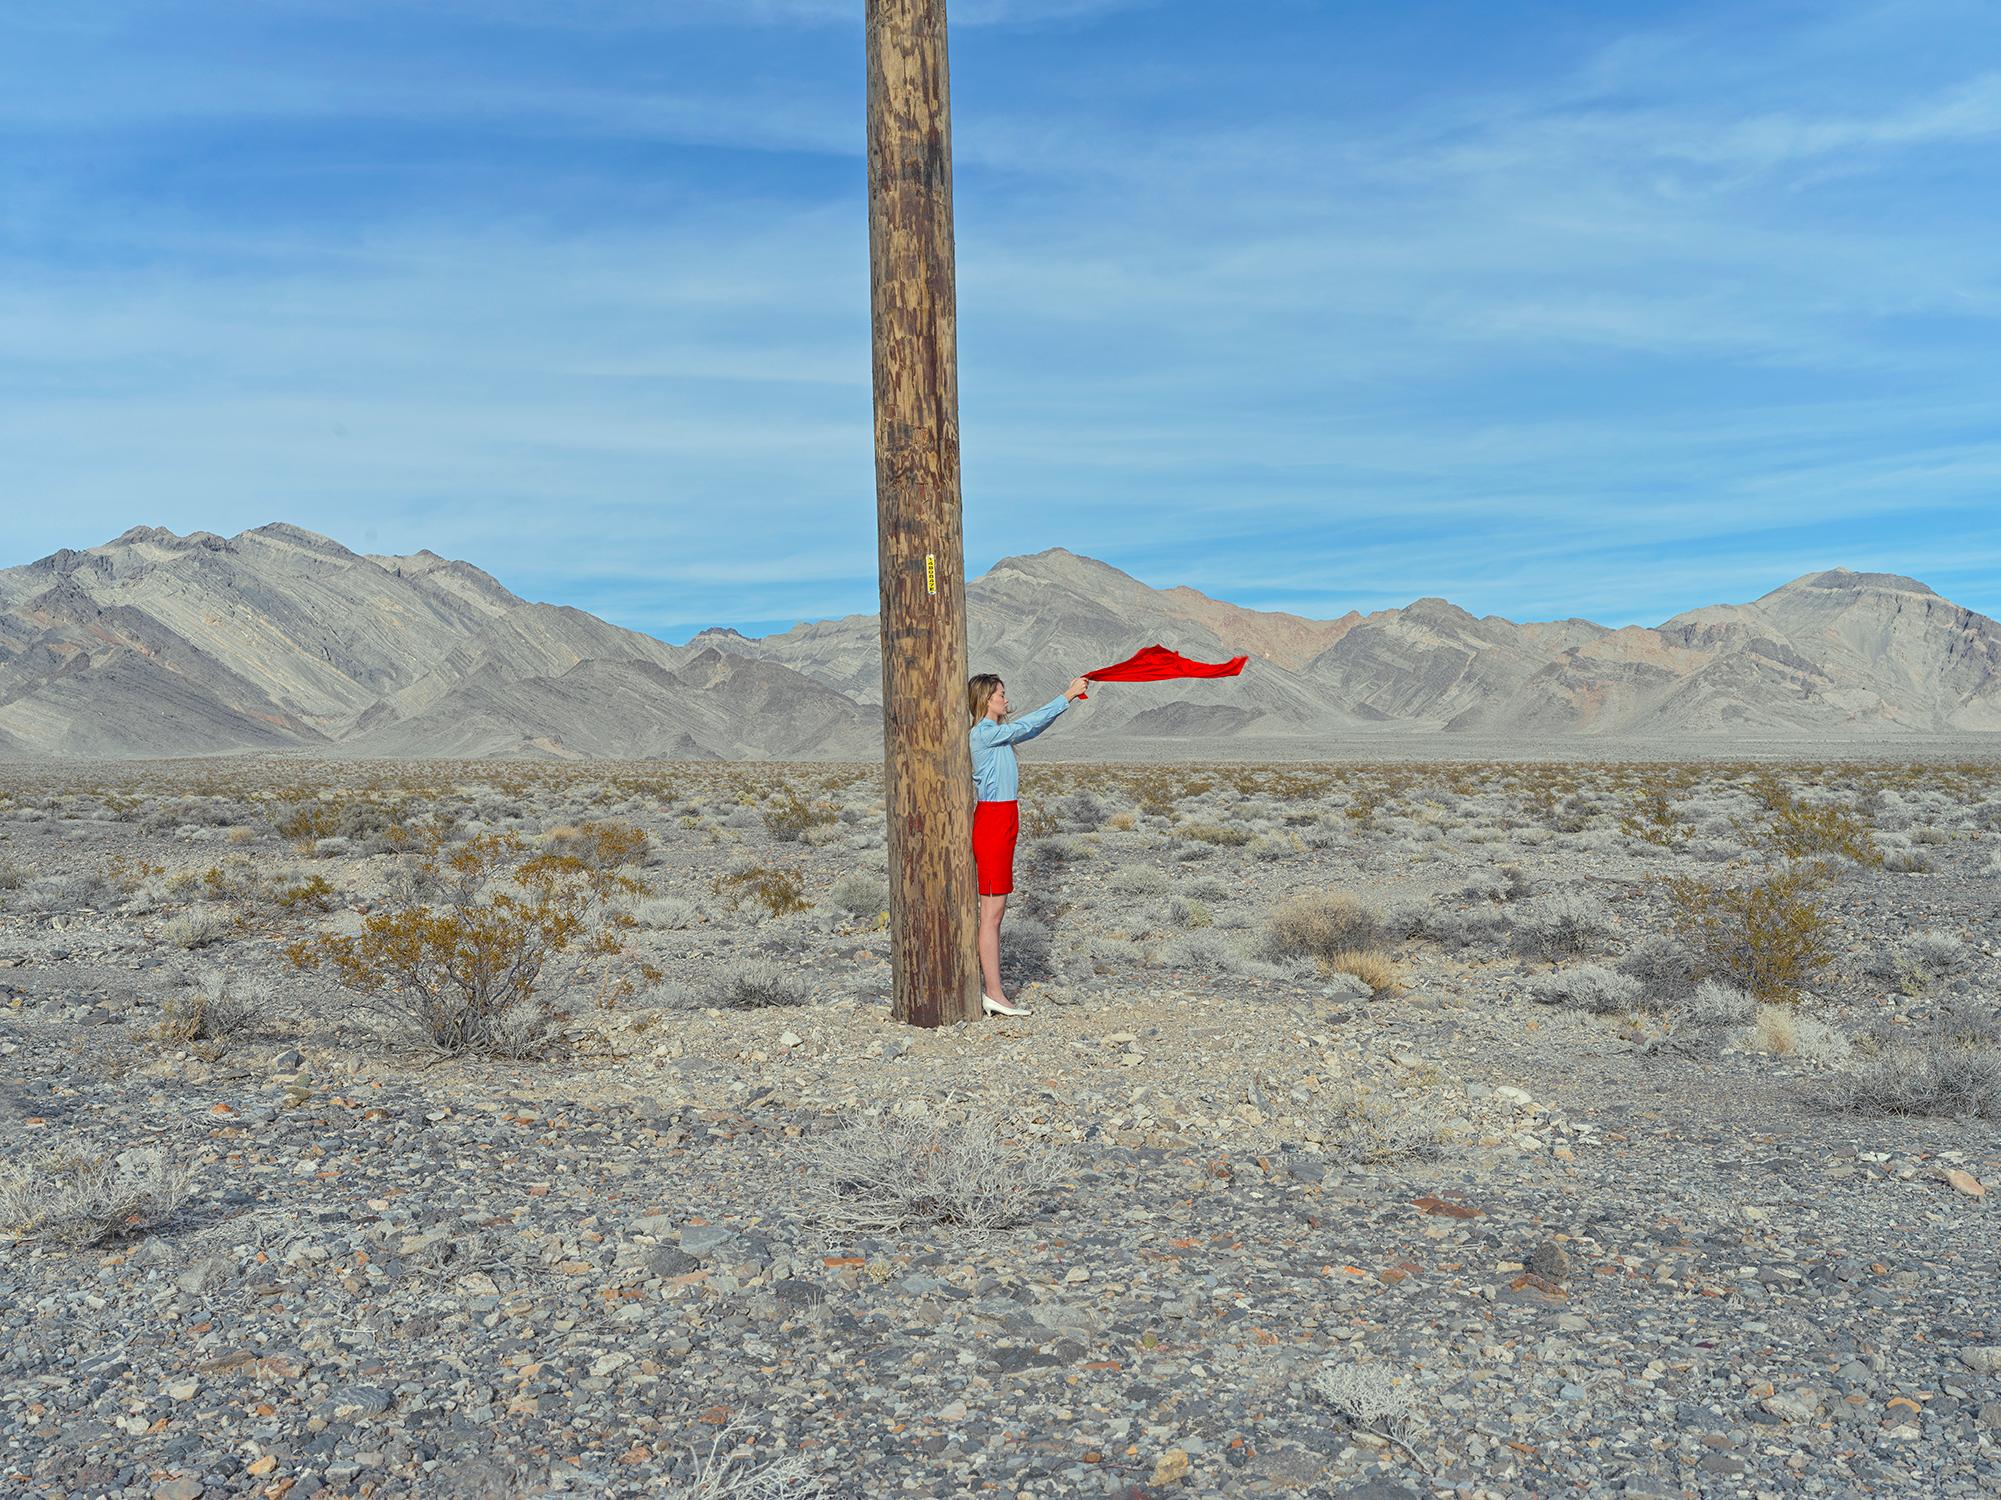 Maria Svarbova's most recent series captures her signature poses in the landscape of Death Valley. With her signature aesthetic and minimal color palate this work creates a sense of lost Americana.
 
Price for print only. Limited edition of 10.